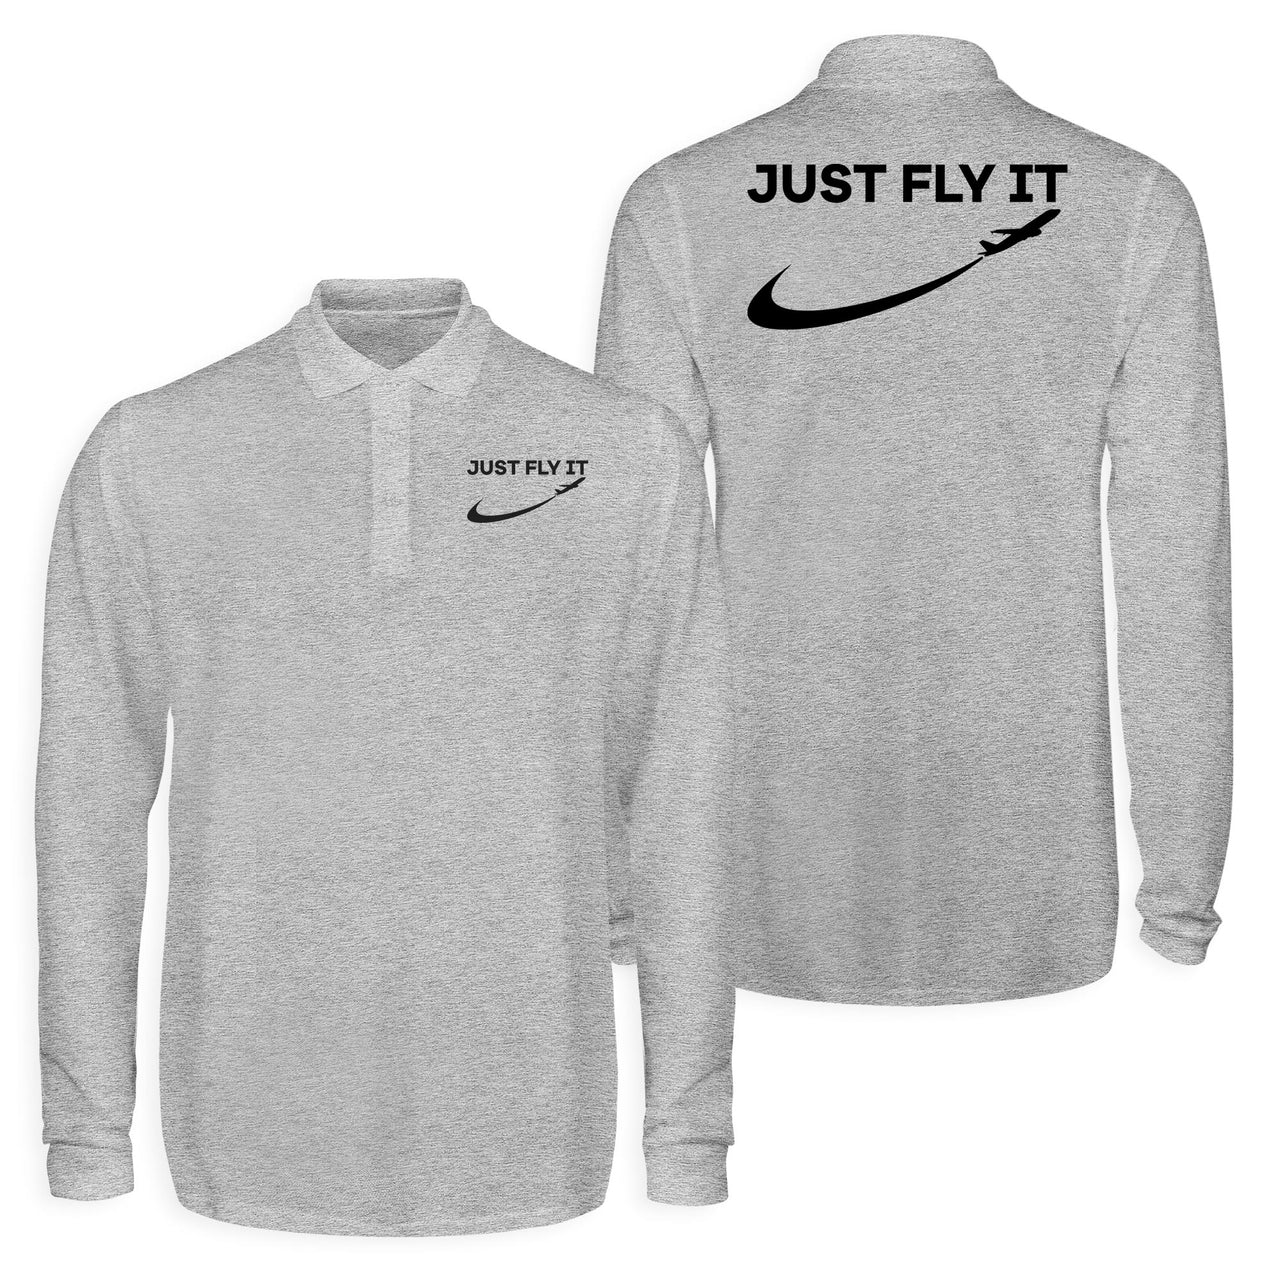 Just Fly It 2 Designed Long Sleeve Polo T-Shirts (Double-Side)